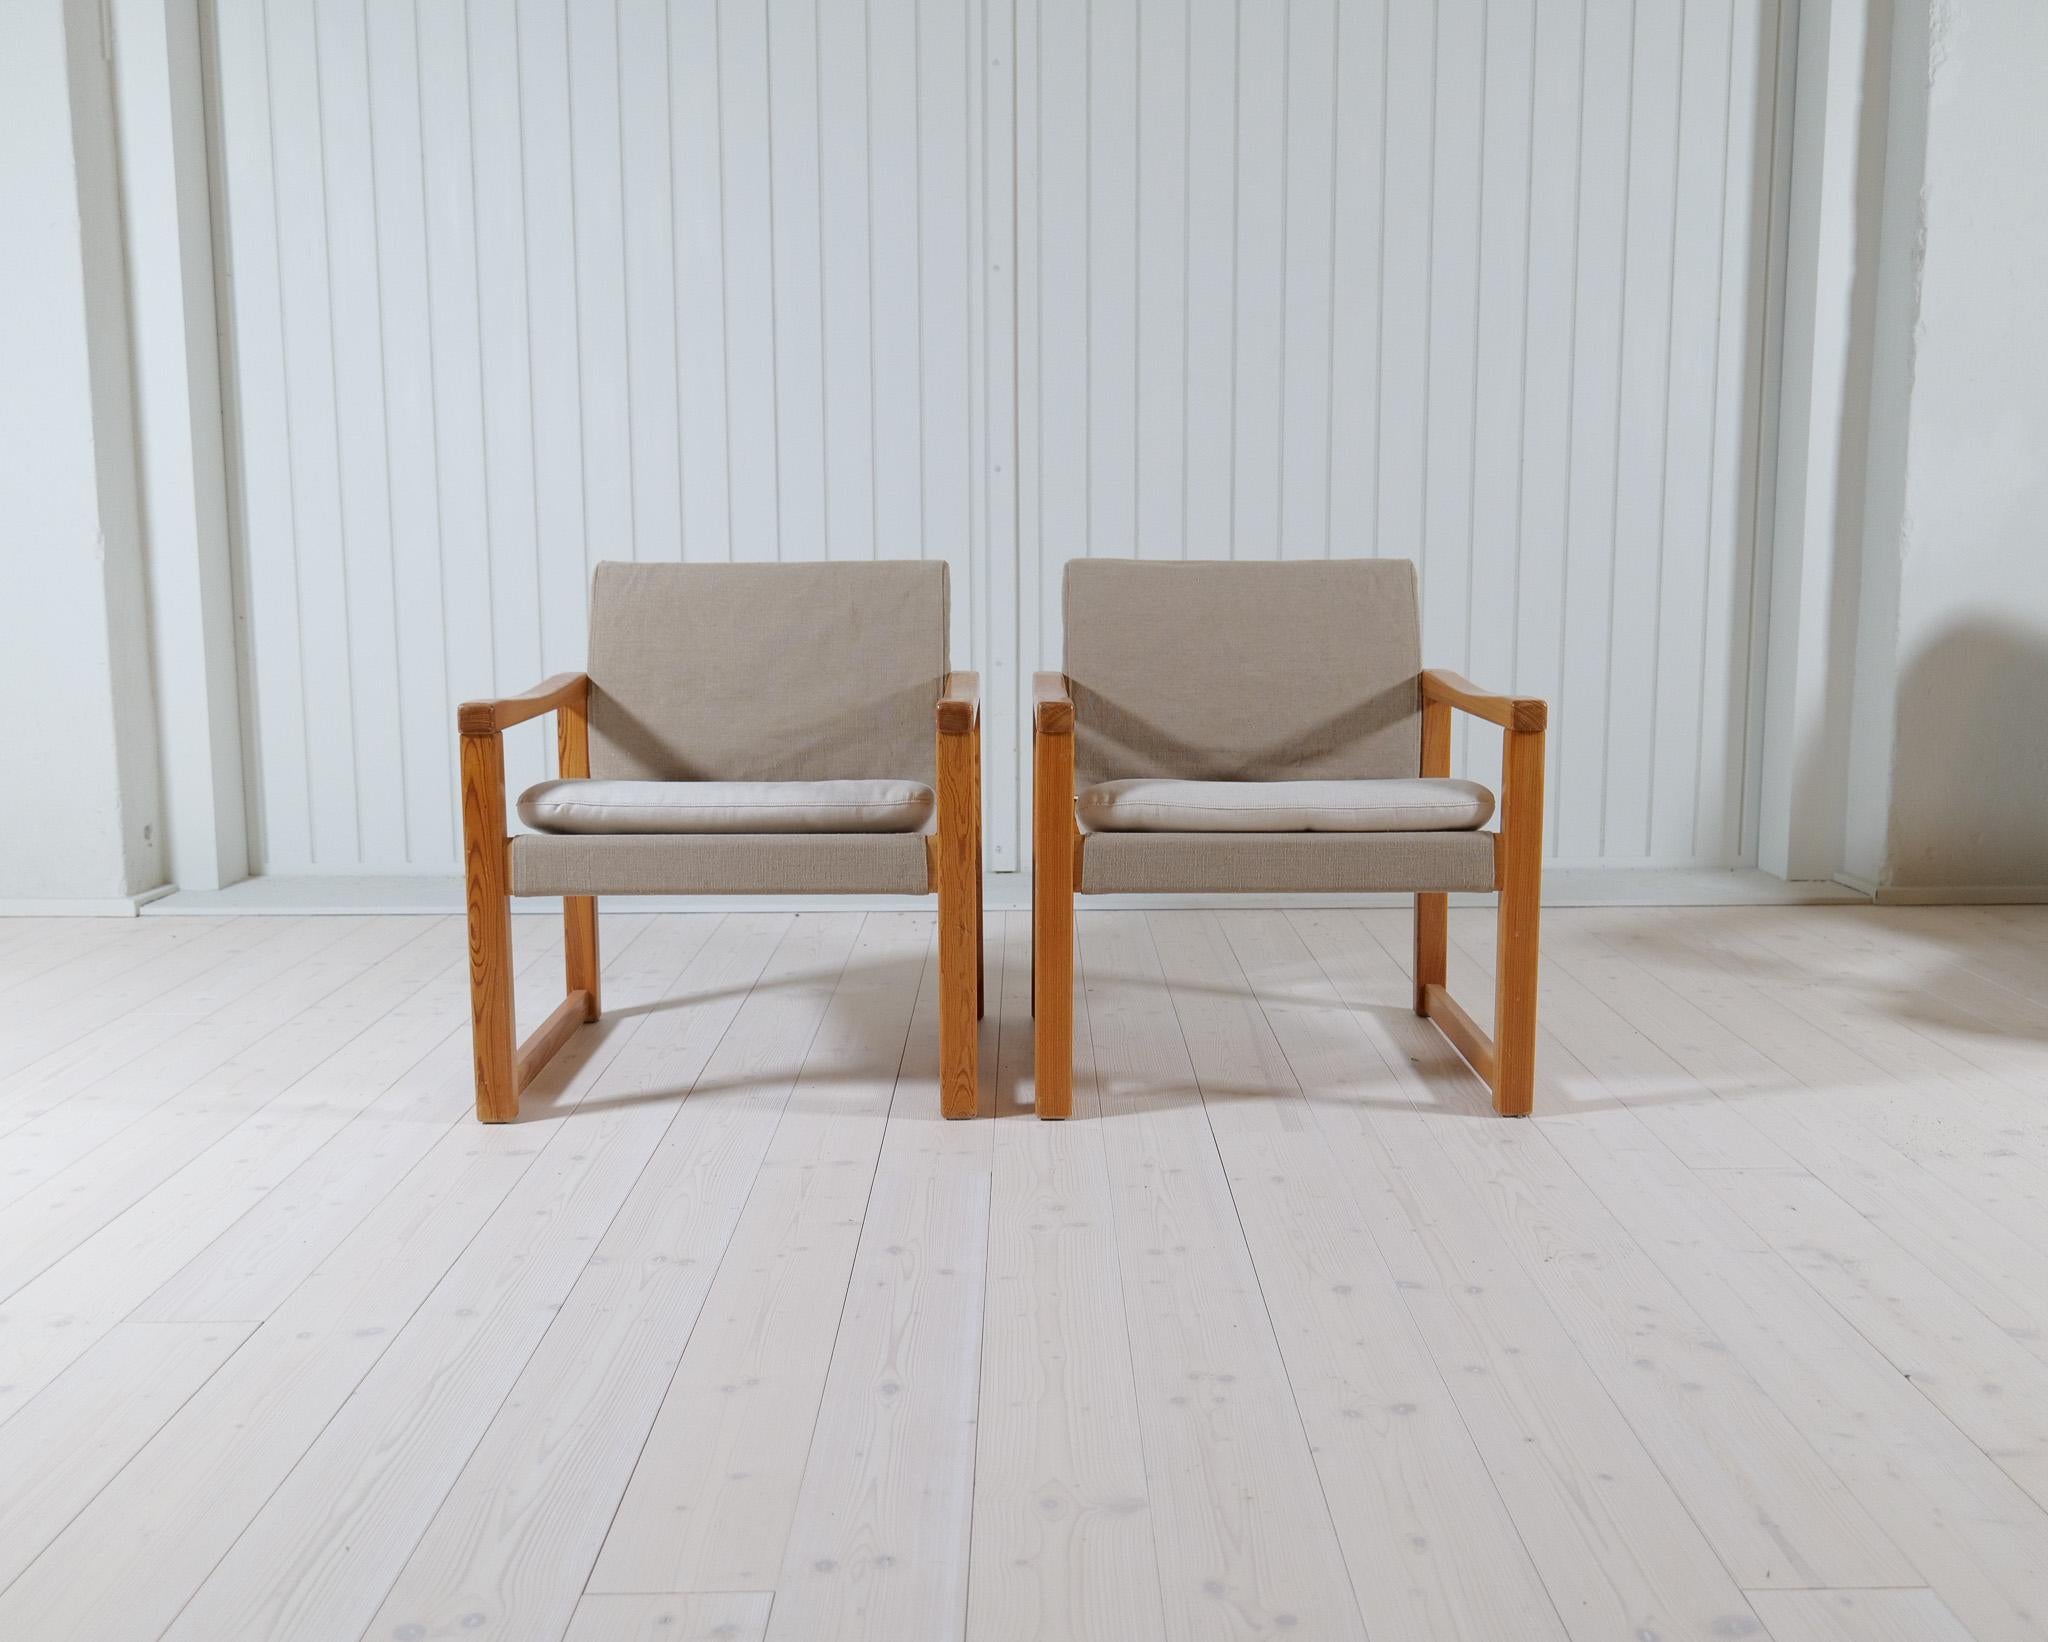 Midcentury Modern Karin Mobring Armchairs Model Diana by Ikea in Sweden, 1970s For Sale 2